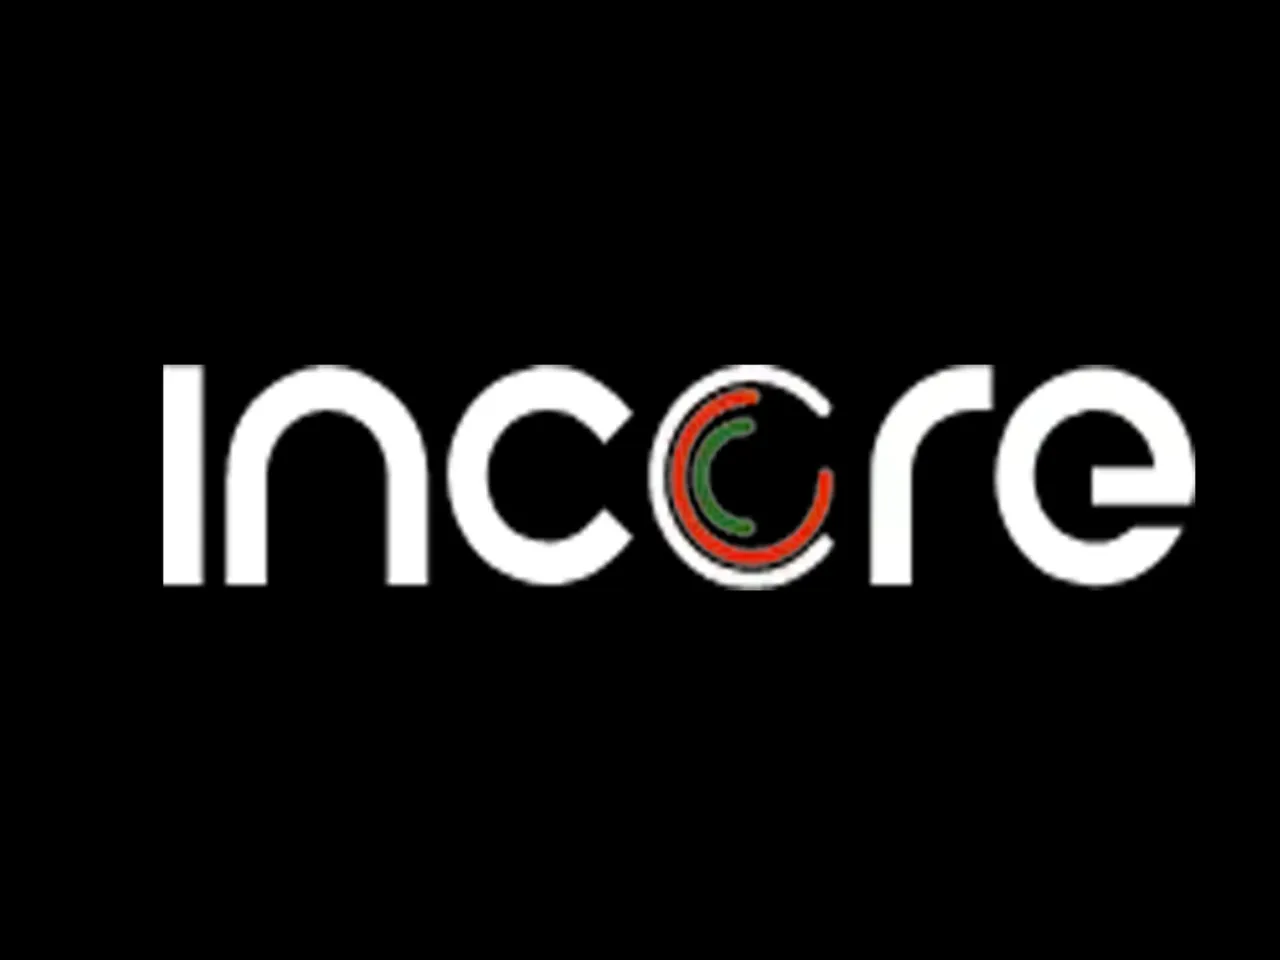 Semiconductor startup InCore Semiconductors raises $3M from Sequoia